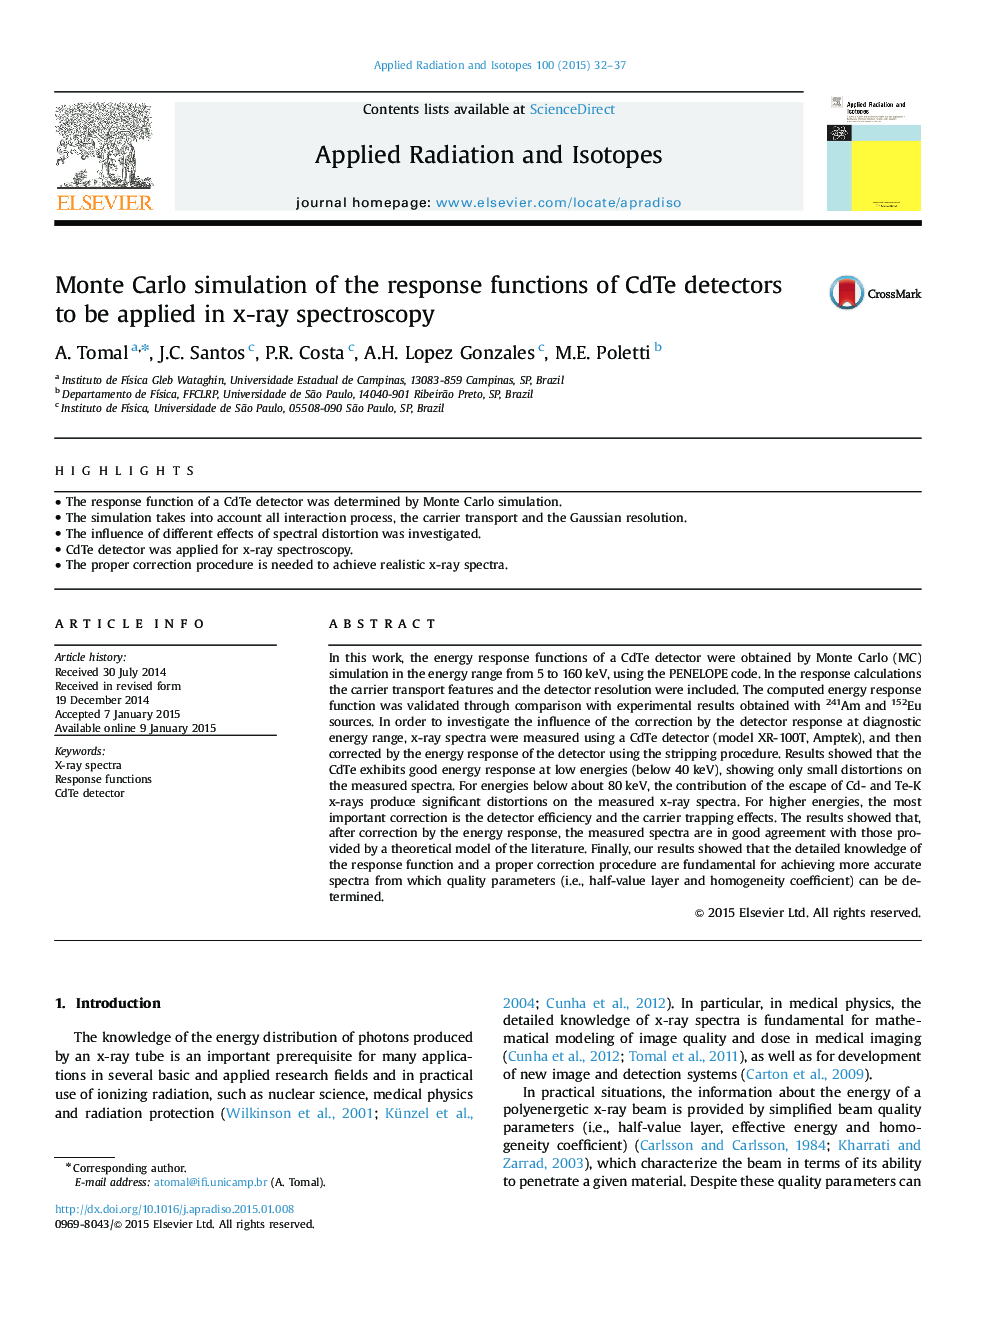 Monte Carlo simulation of the response functions of CdTe detectors to be applied in x-ray spectroscopy